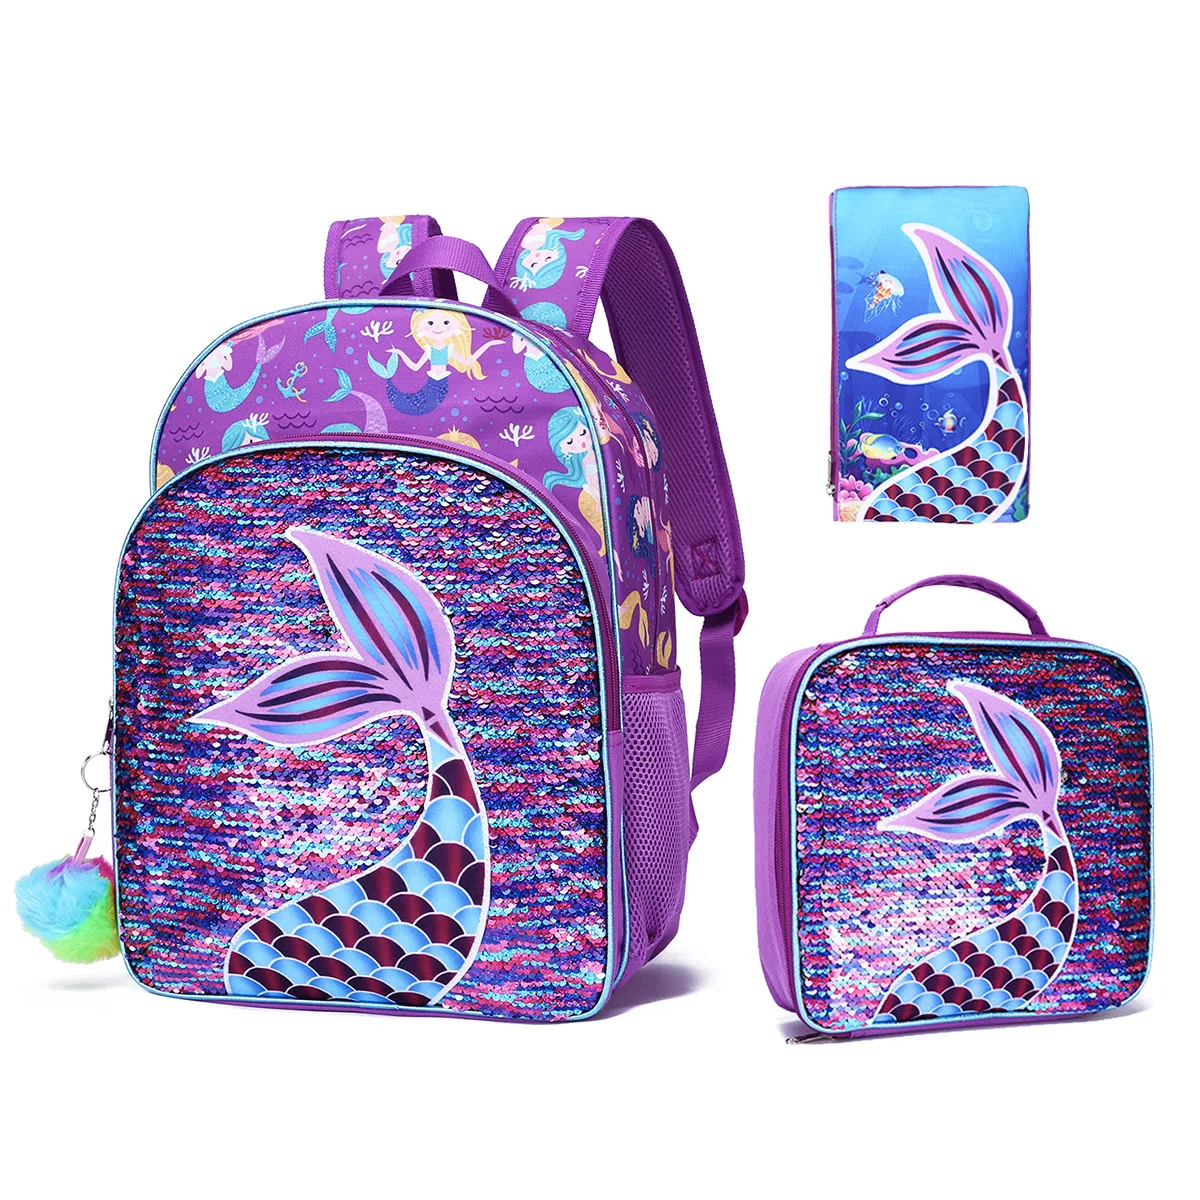 

Rt1505-d5 Spot New Mermaid Sequin Three Piece Set Primary and Secondary School Schoolbag Meal Bag Children's Backpack